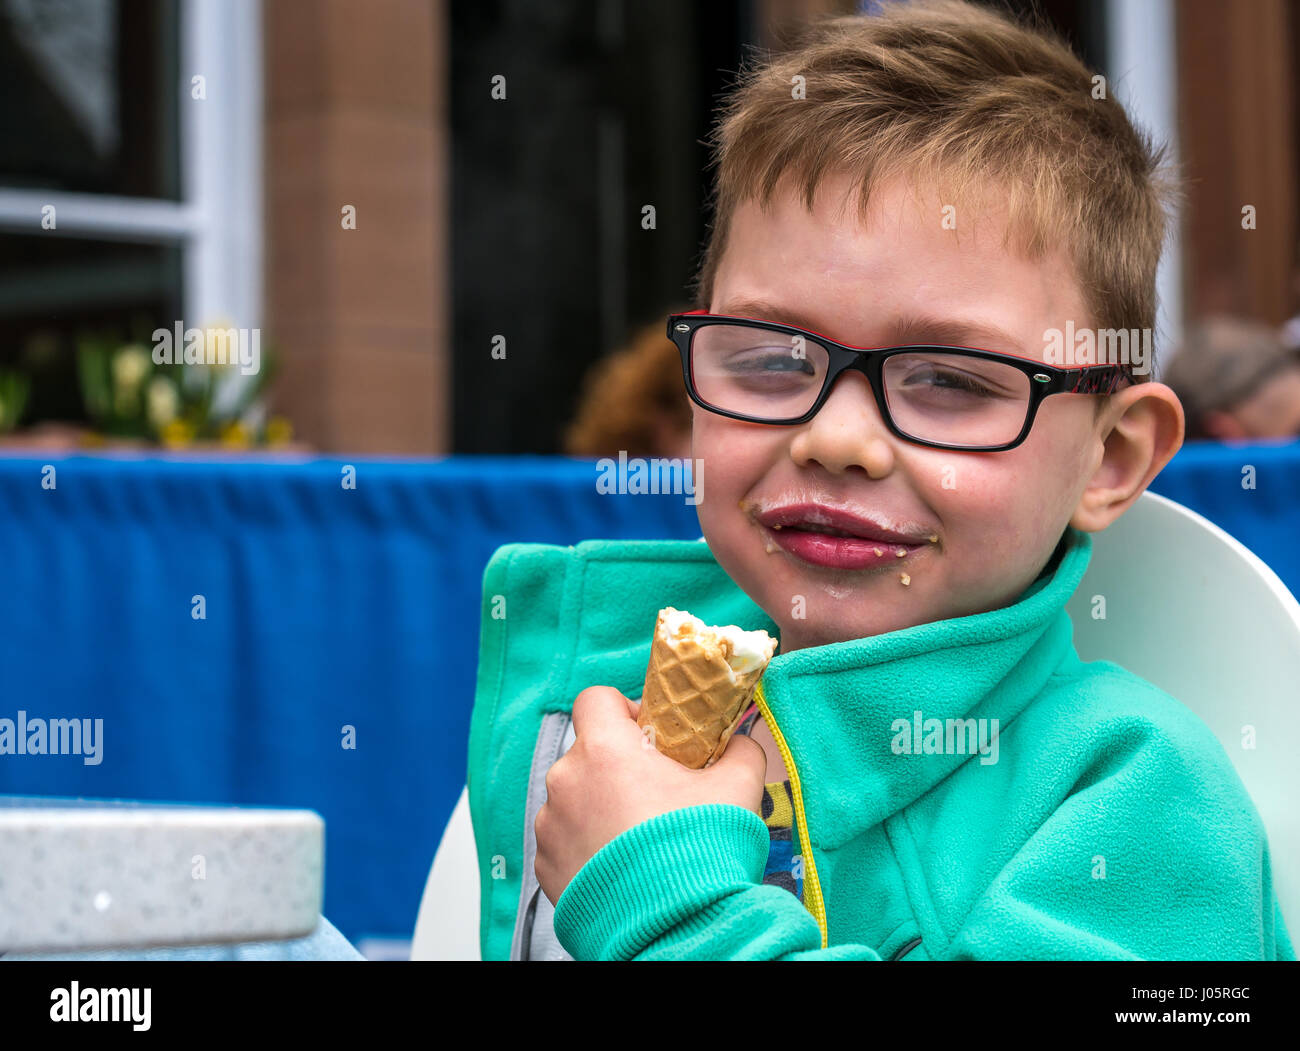 Young boy smiling eating ice cream cone with happy satisfied expression, Scotland, UK Stock Photo